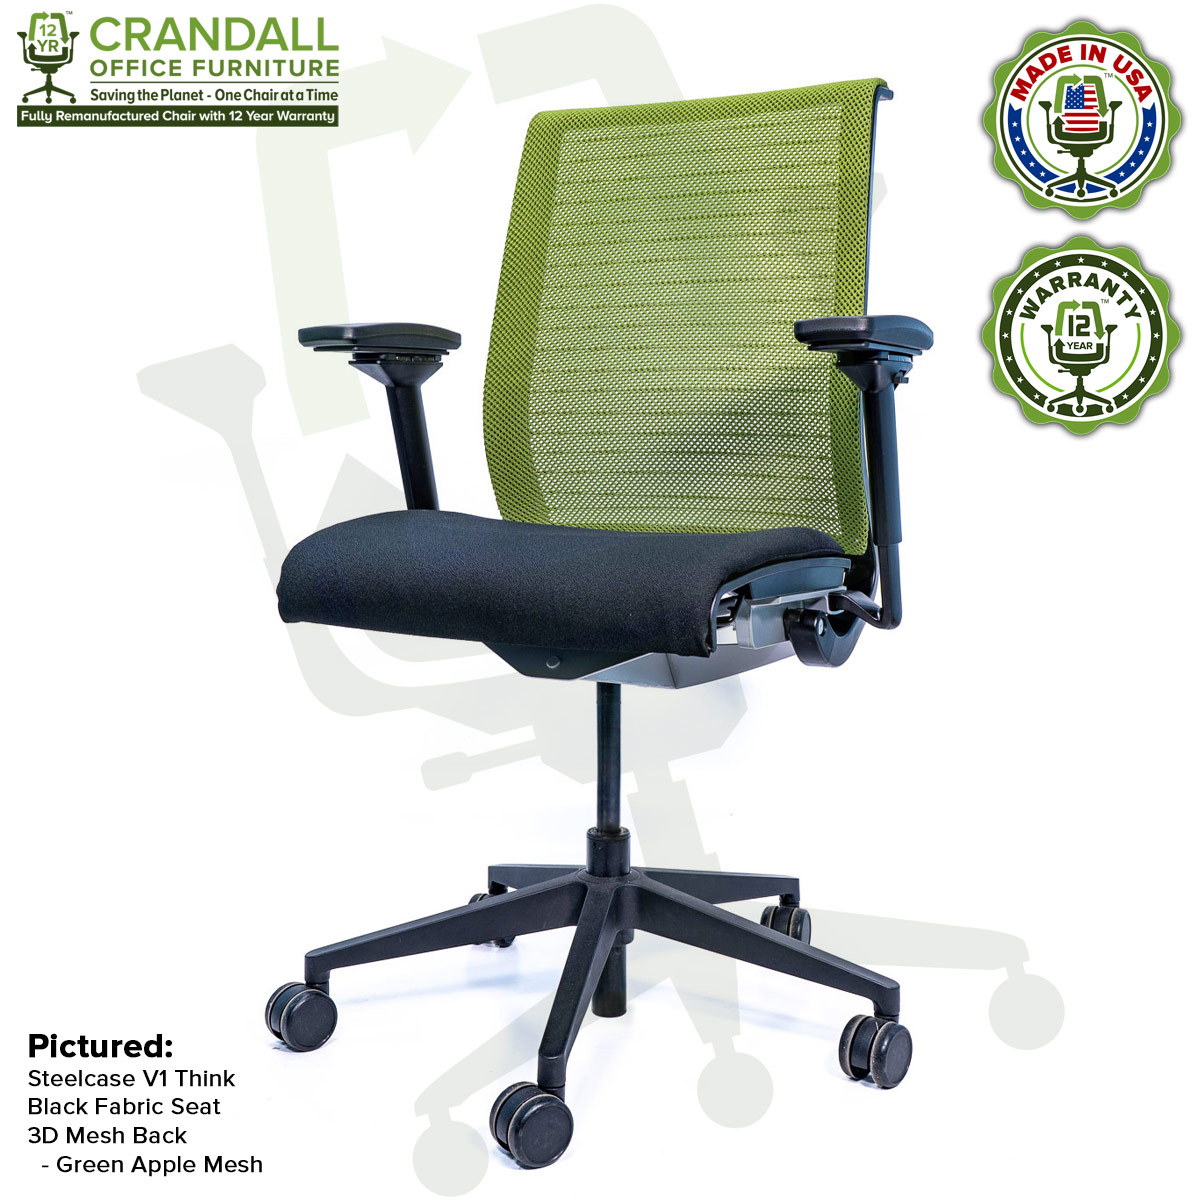 Crandall Office Furniture Remanufactured Steelcase Think Chair with 12 Year Warranty - Mesh - Green Apple